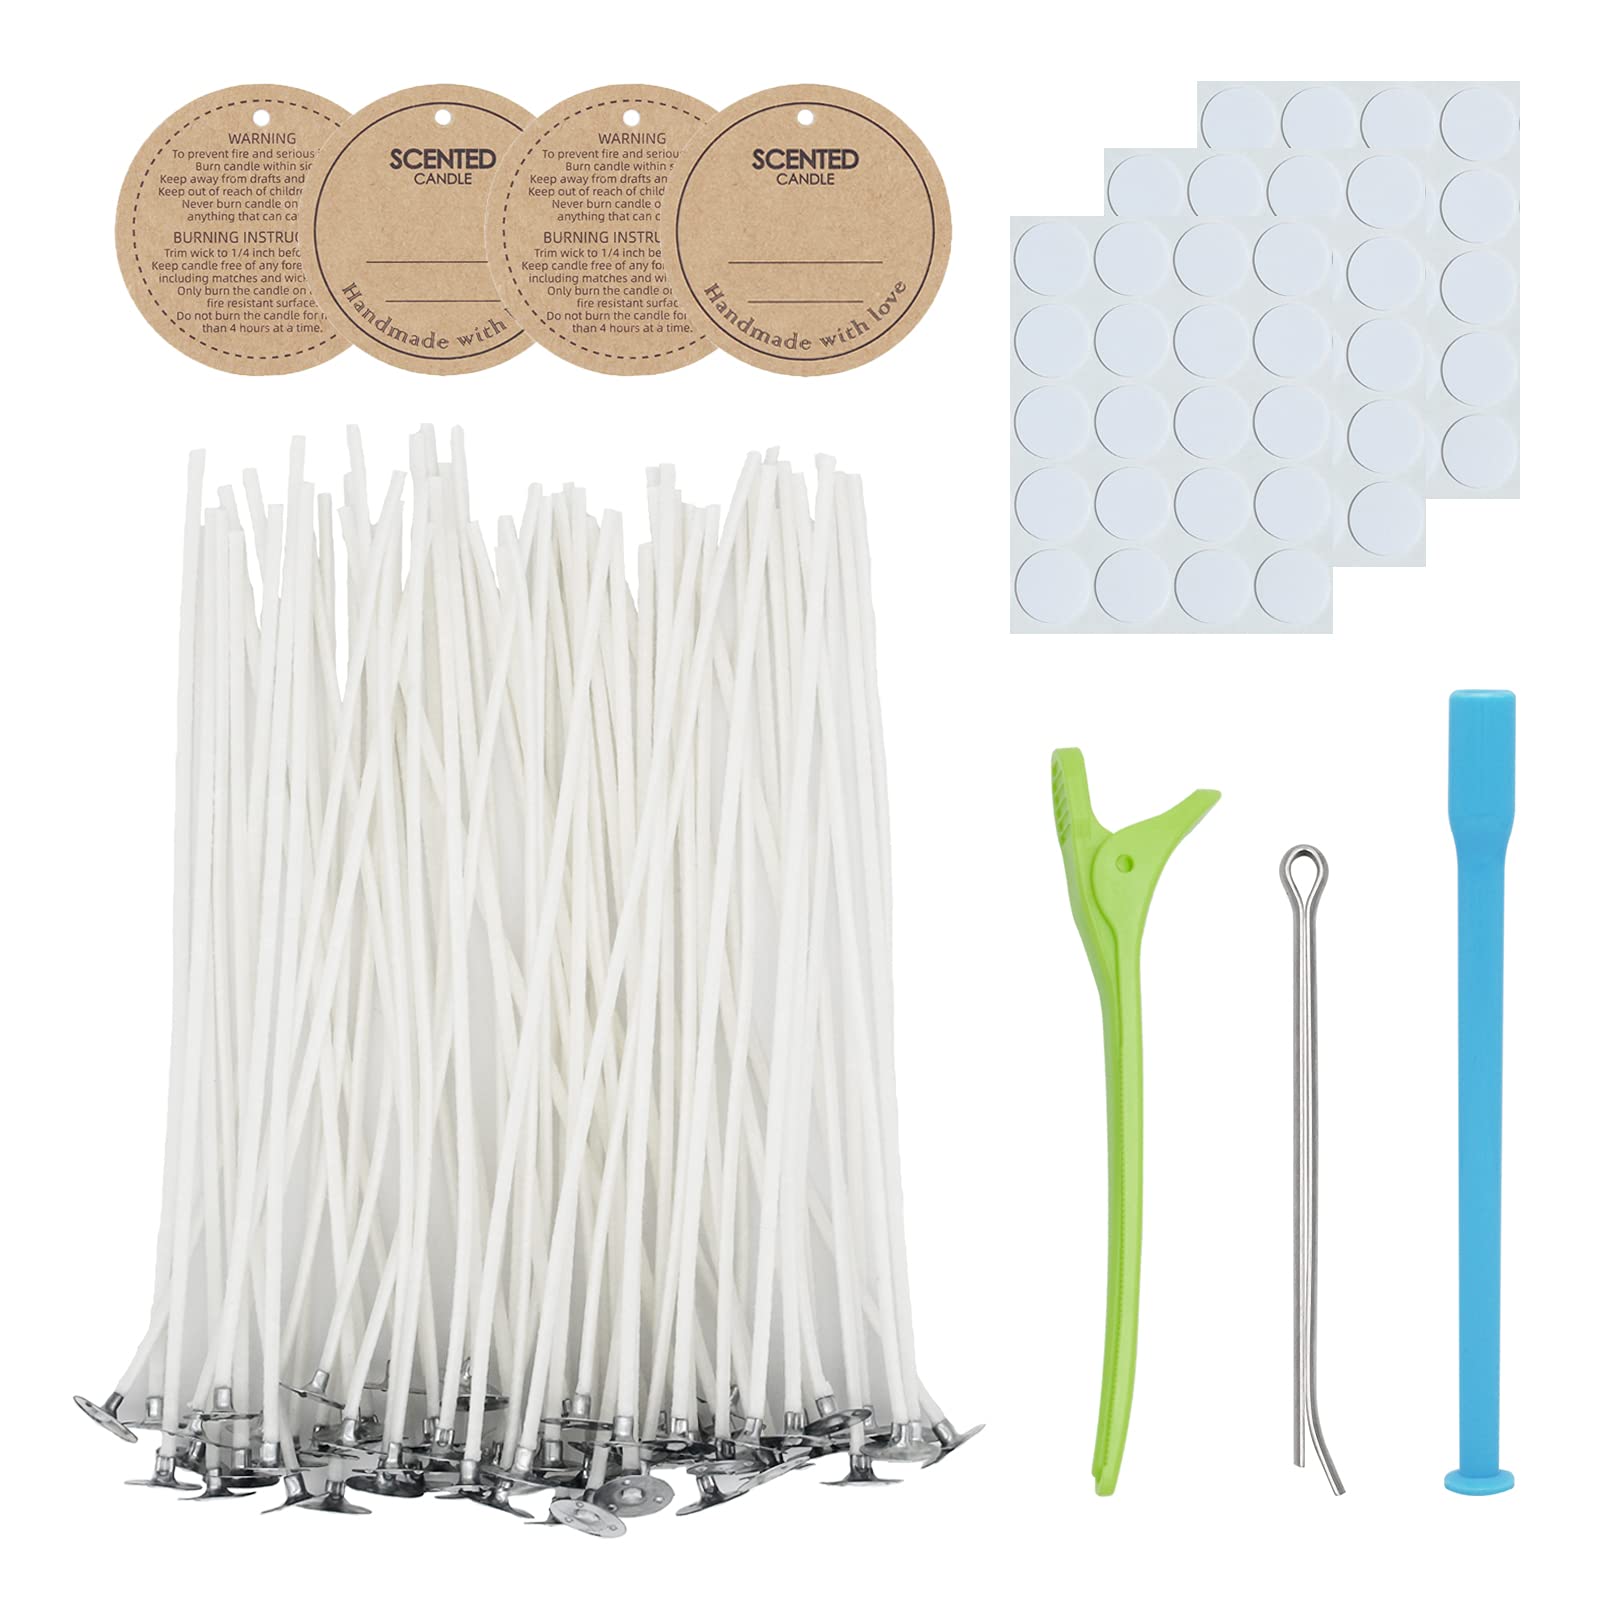 CandMak Candle Wick Kit, 60pcs Candle Wicks with Wick Stickers